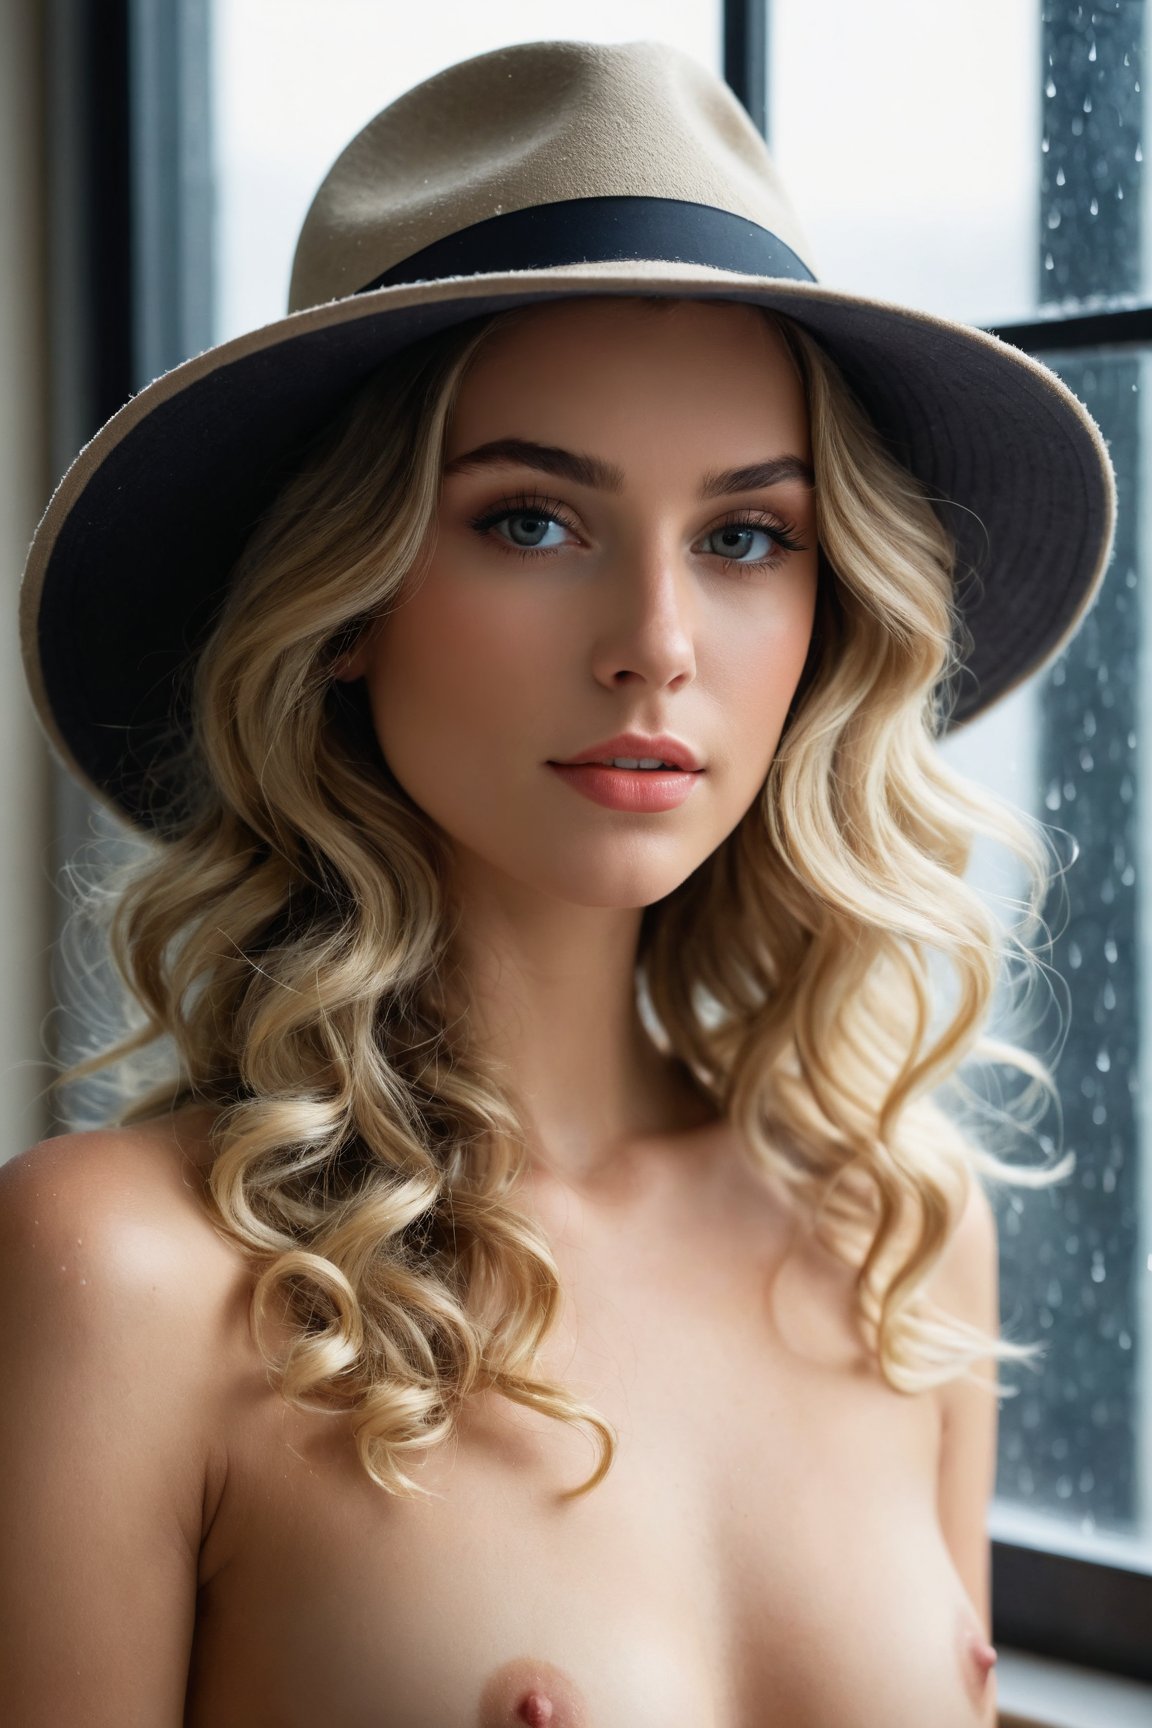 award winning photography of a stunningly beautiful naked 19-year-old girl, wearing a hat, wearing a hat with a seductive look, adding a touch of mystery and allure, steel gray eyes, , ash blonde retro curls hair, curiosity, rainy window lighting, soft, diffused light through raindrops on a window, creating a cozy and intimate mood, in a vibrant coral reef, teeming with a rainbow of colorful fish and intricate marine life, remarkable color, ultra realistic, shot with cinematic camera